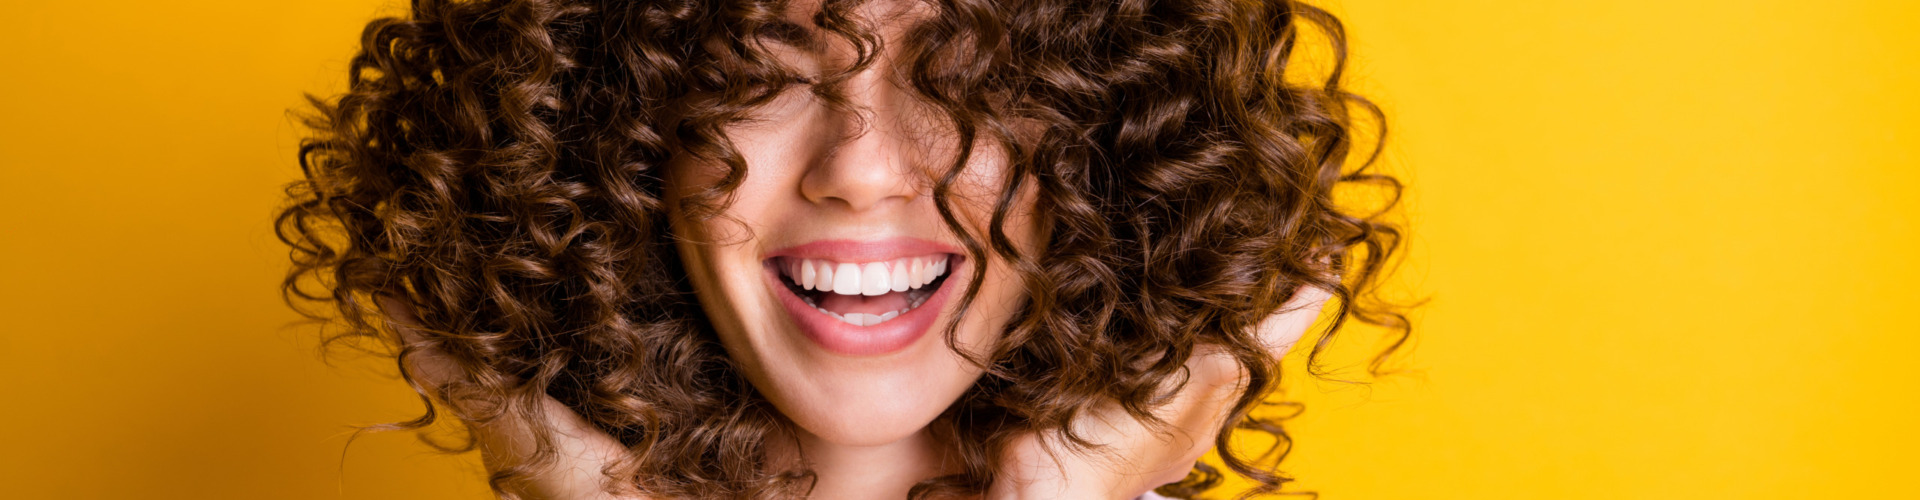 Photo portrait of girl with curly hairstyle wearing t-shirt laughing touching hair isolated on bright yellow color background.